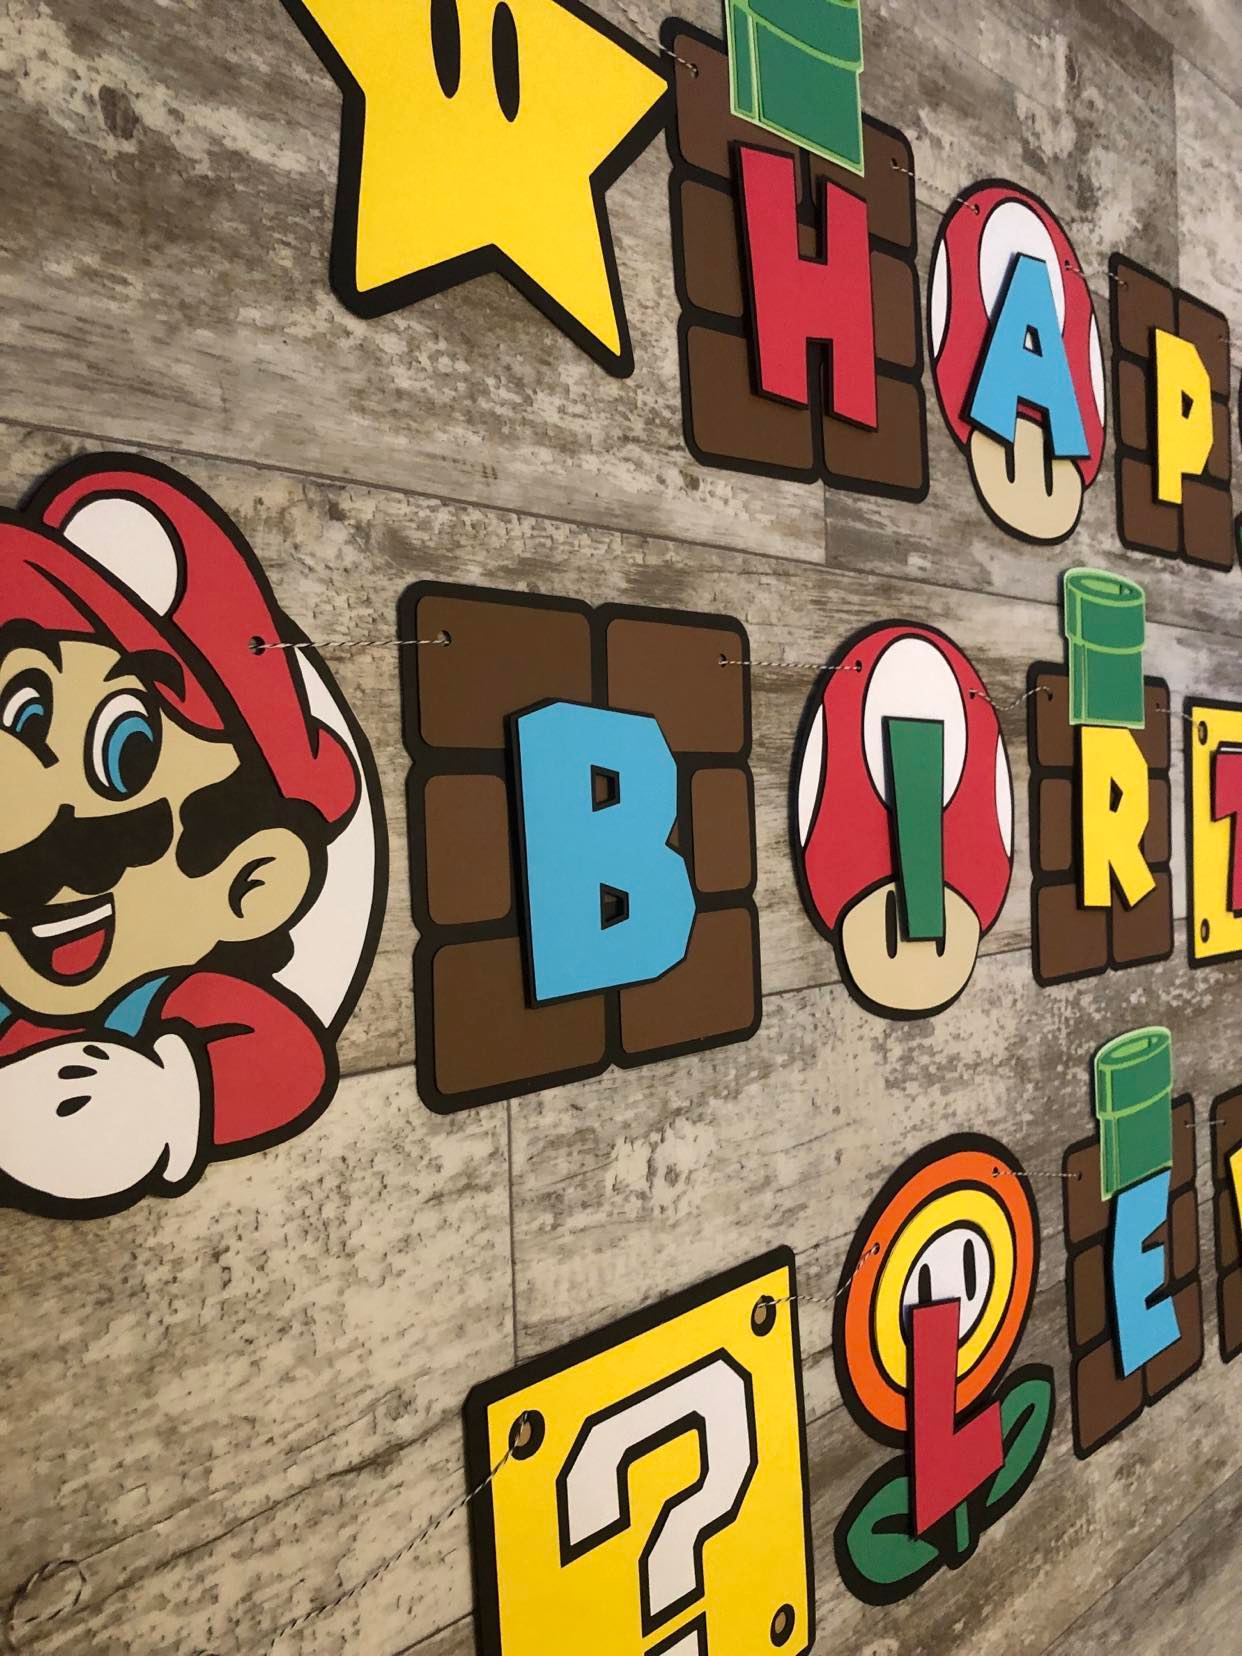 Video Game Inspired Birthday Party Banner